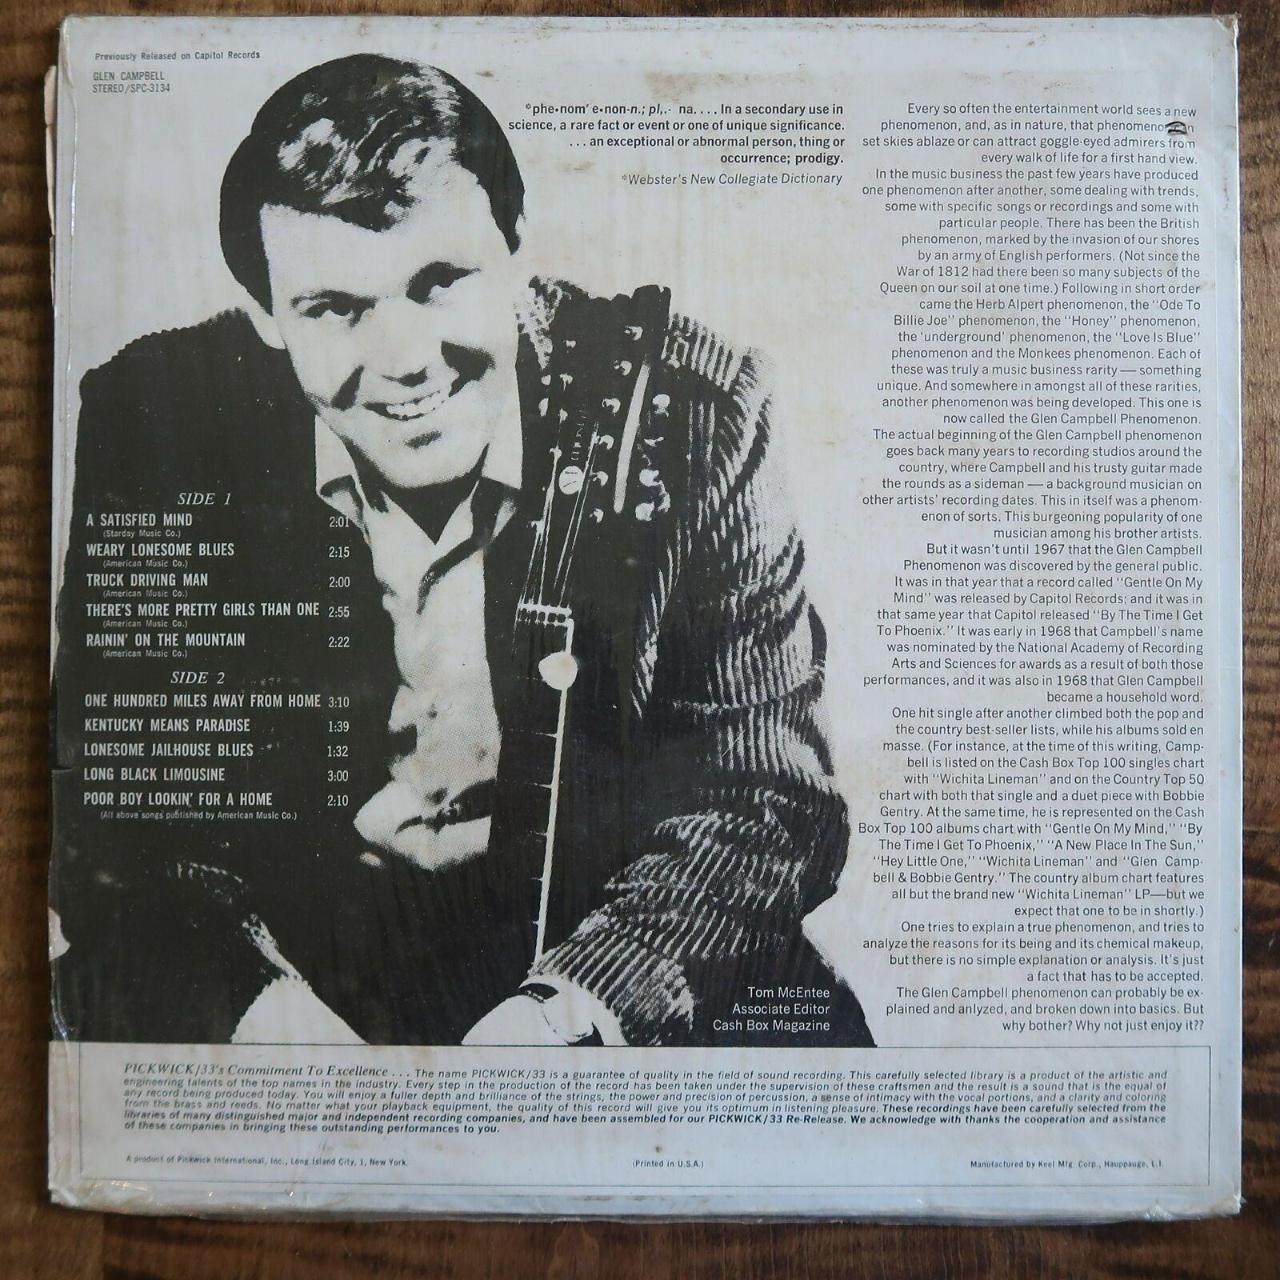 Product Image 2 - GLEN CAMPBELL A SATISFIED MIND